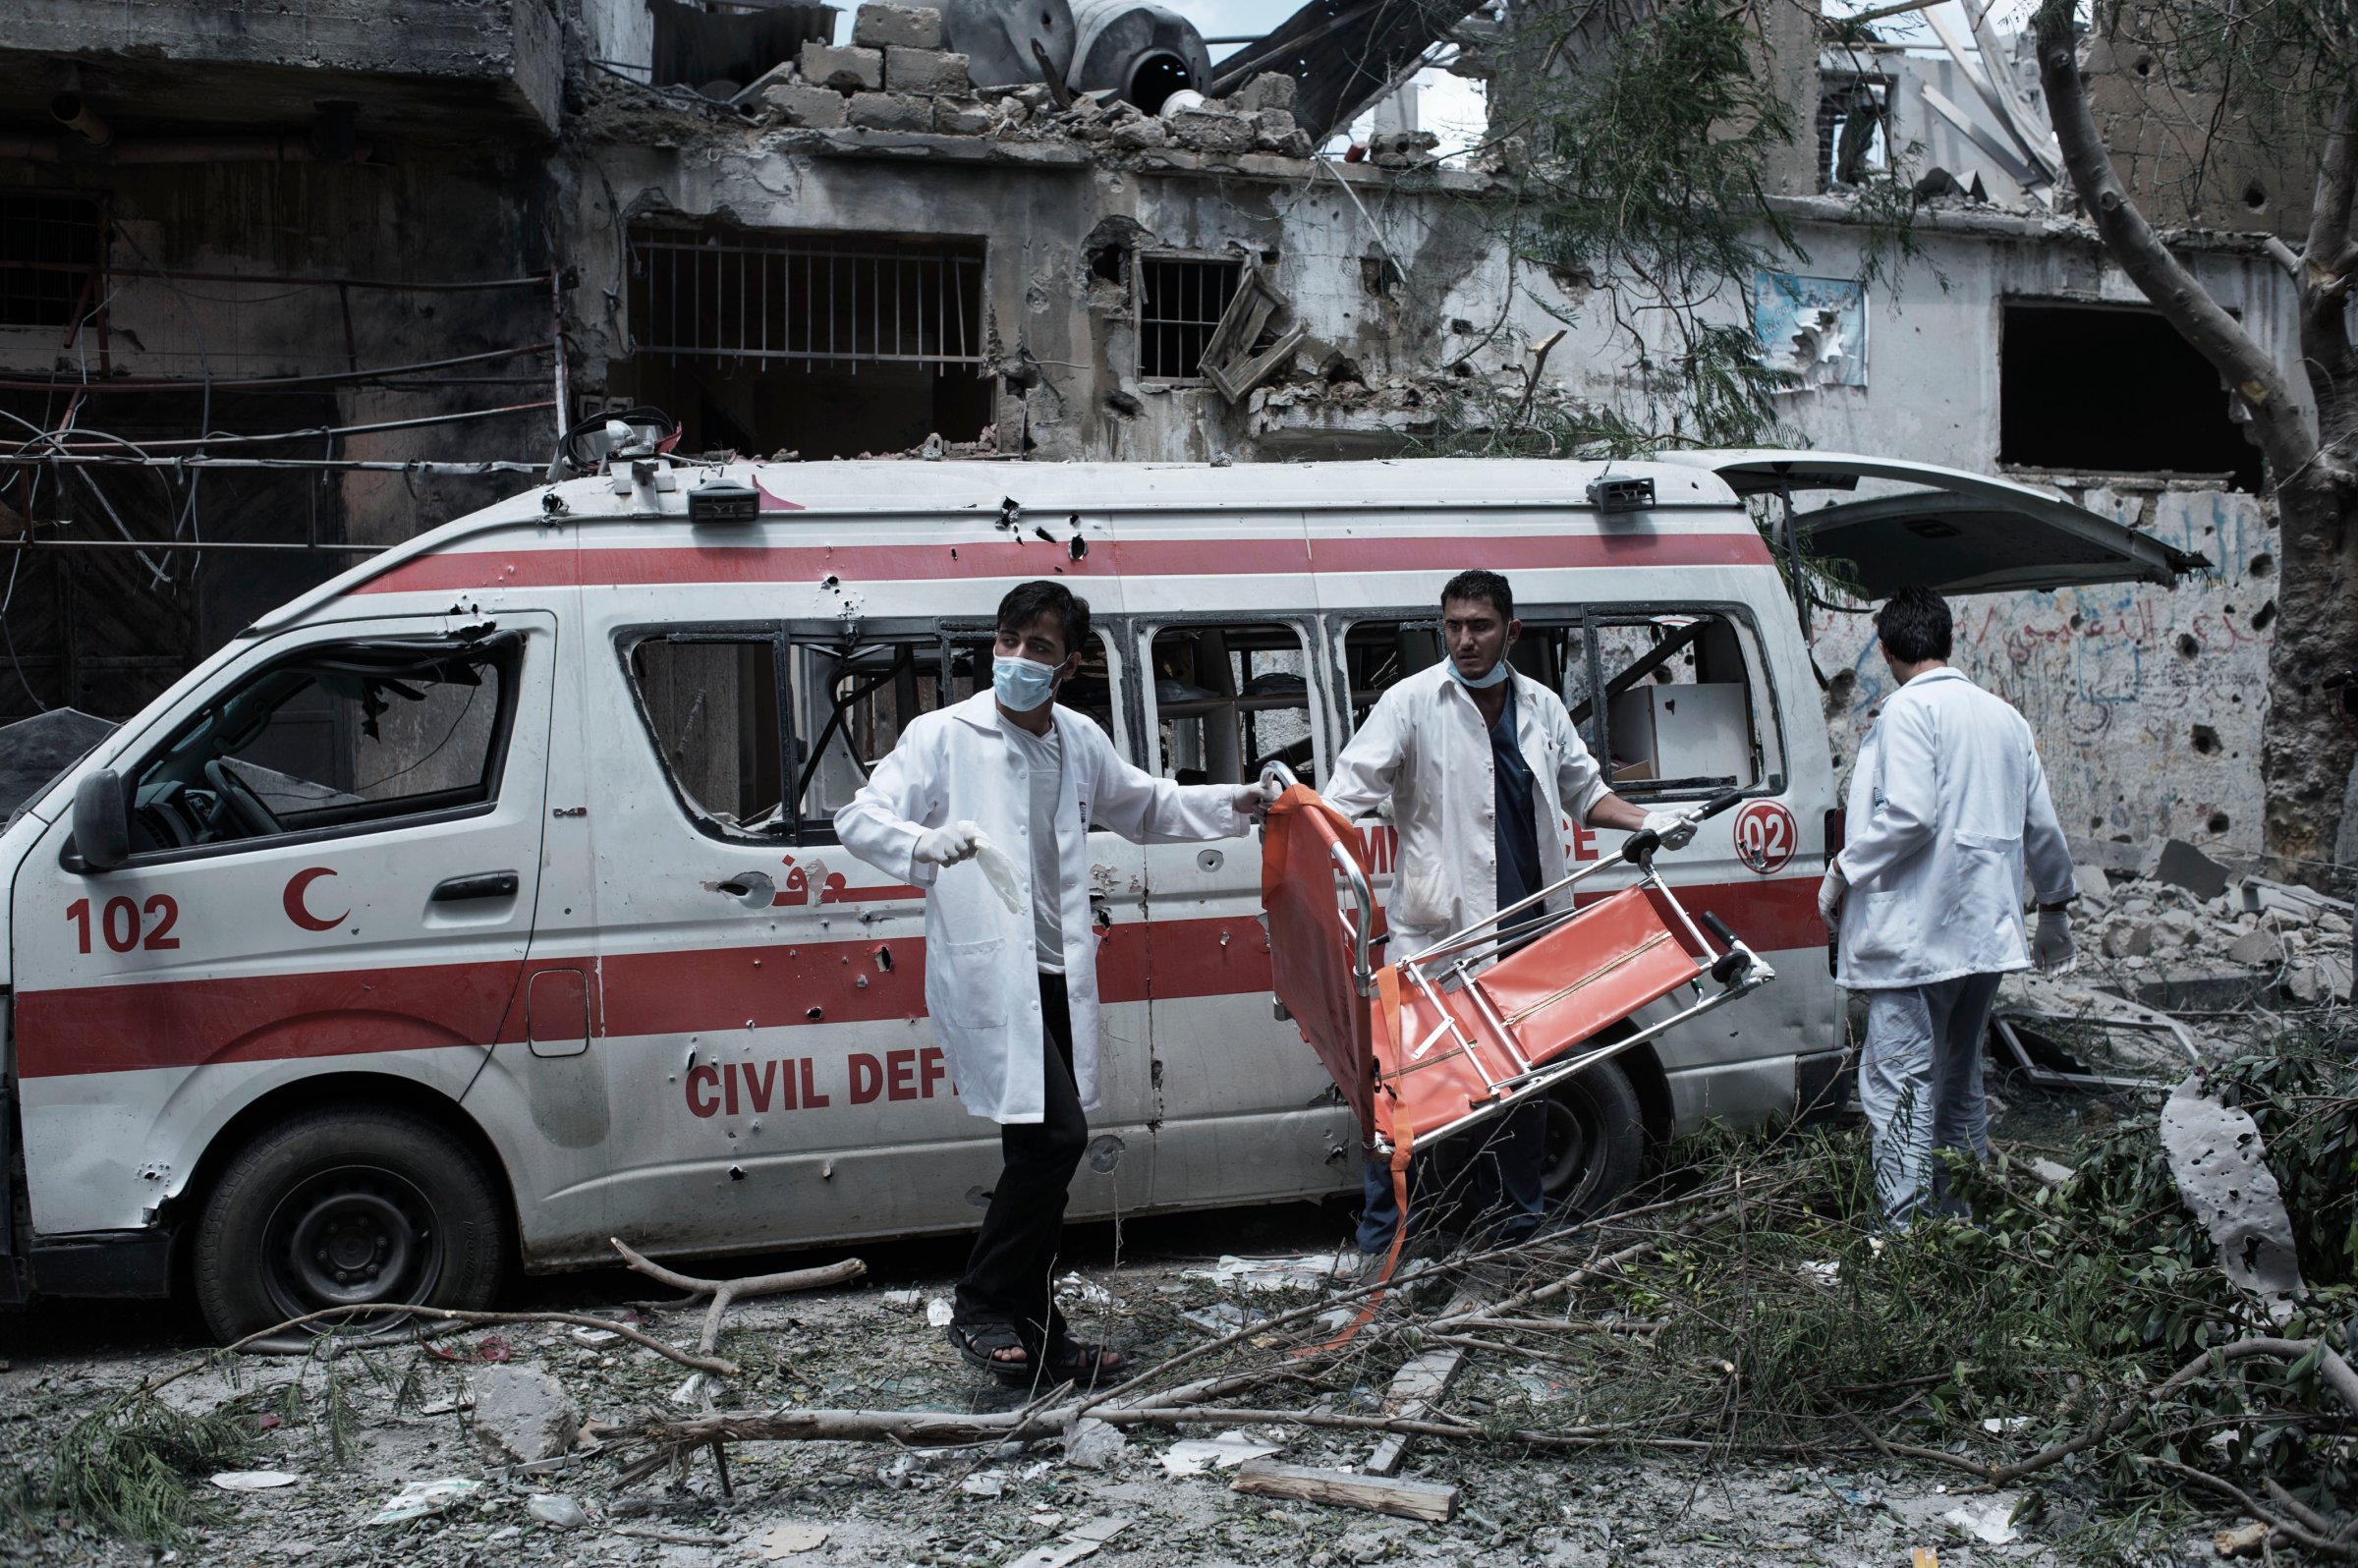 Gaza Strip, Gaza City: During a cease fire, Palestinians medics look for survivors in Gaza's Shujaya district after a night of Israeli heavy shelling on the neighbourhood. In the are two ambulances has been targeted few hours earlier.  ALESSIO ROMENZI